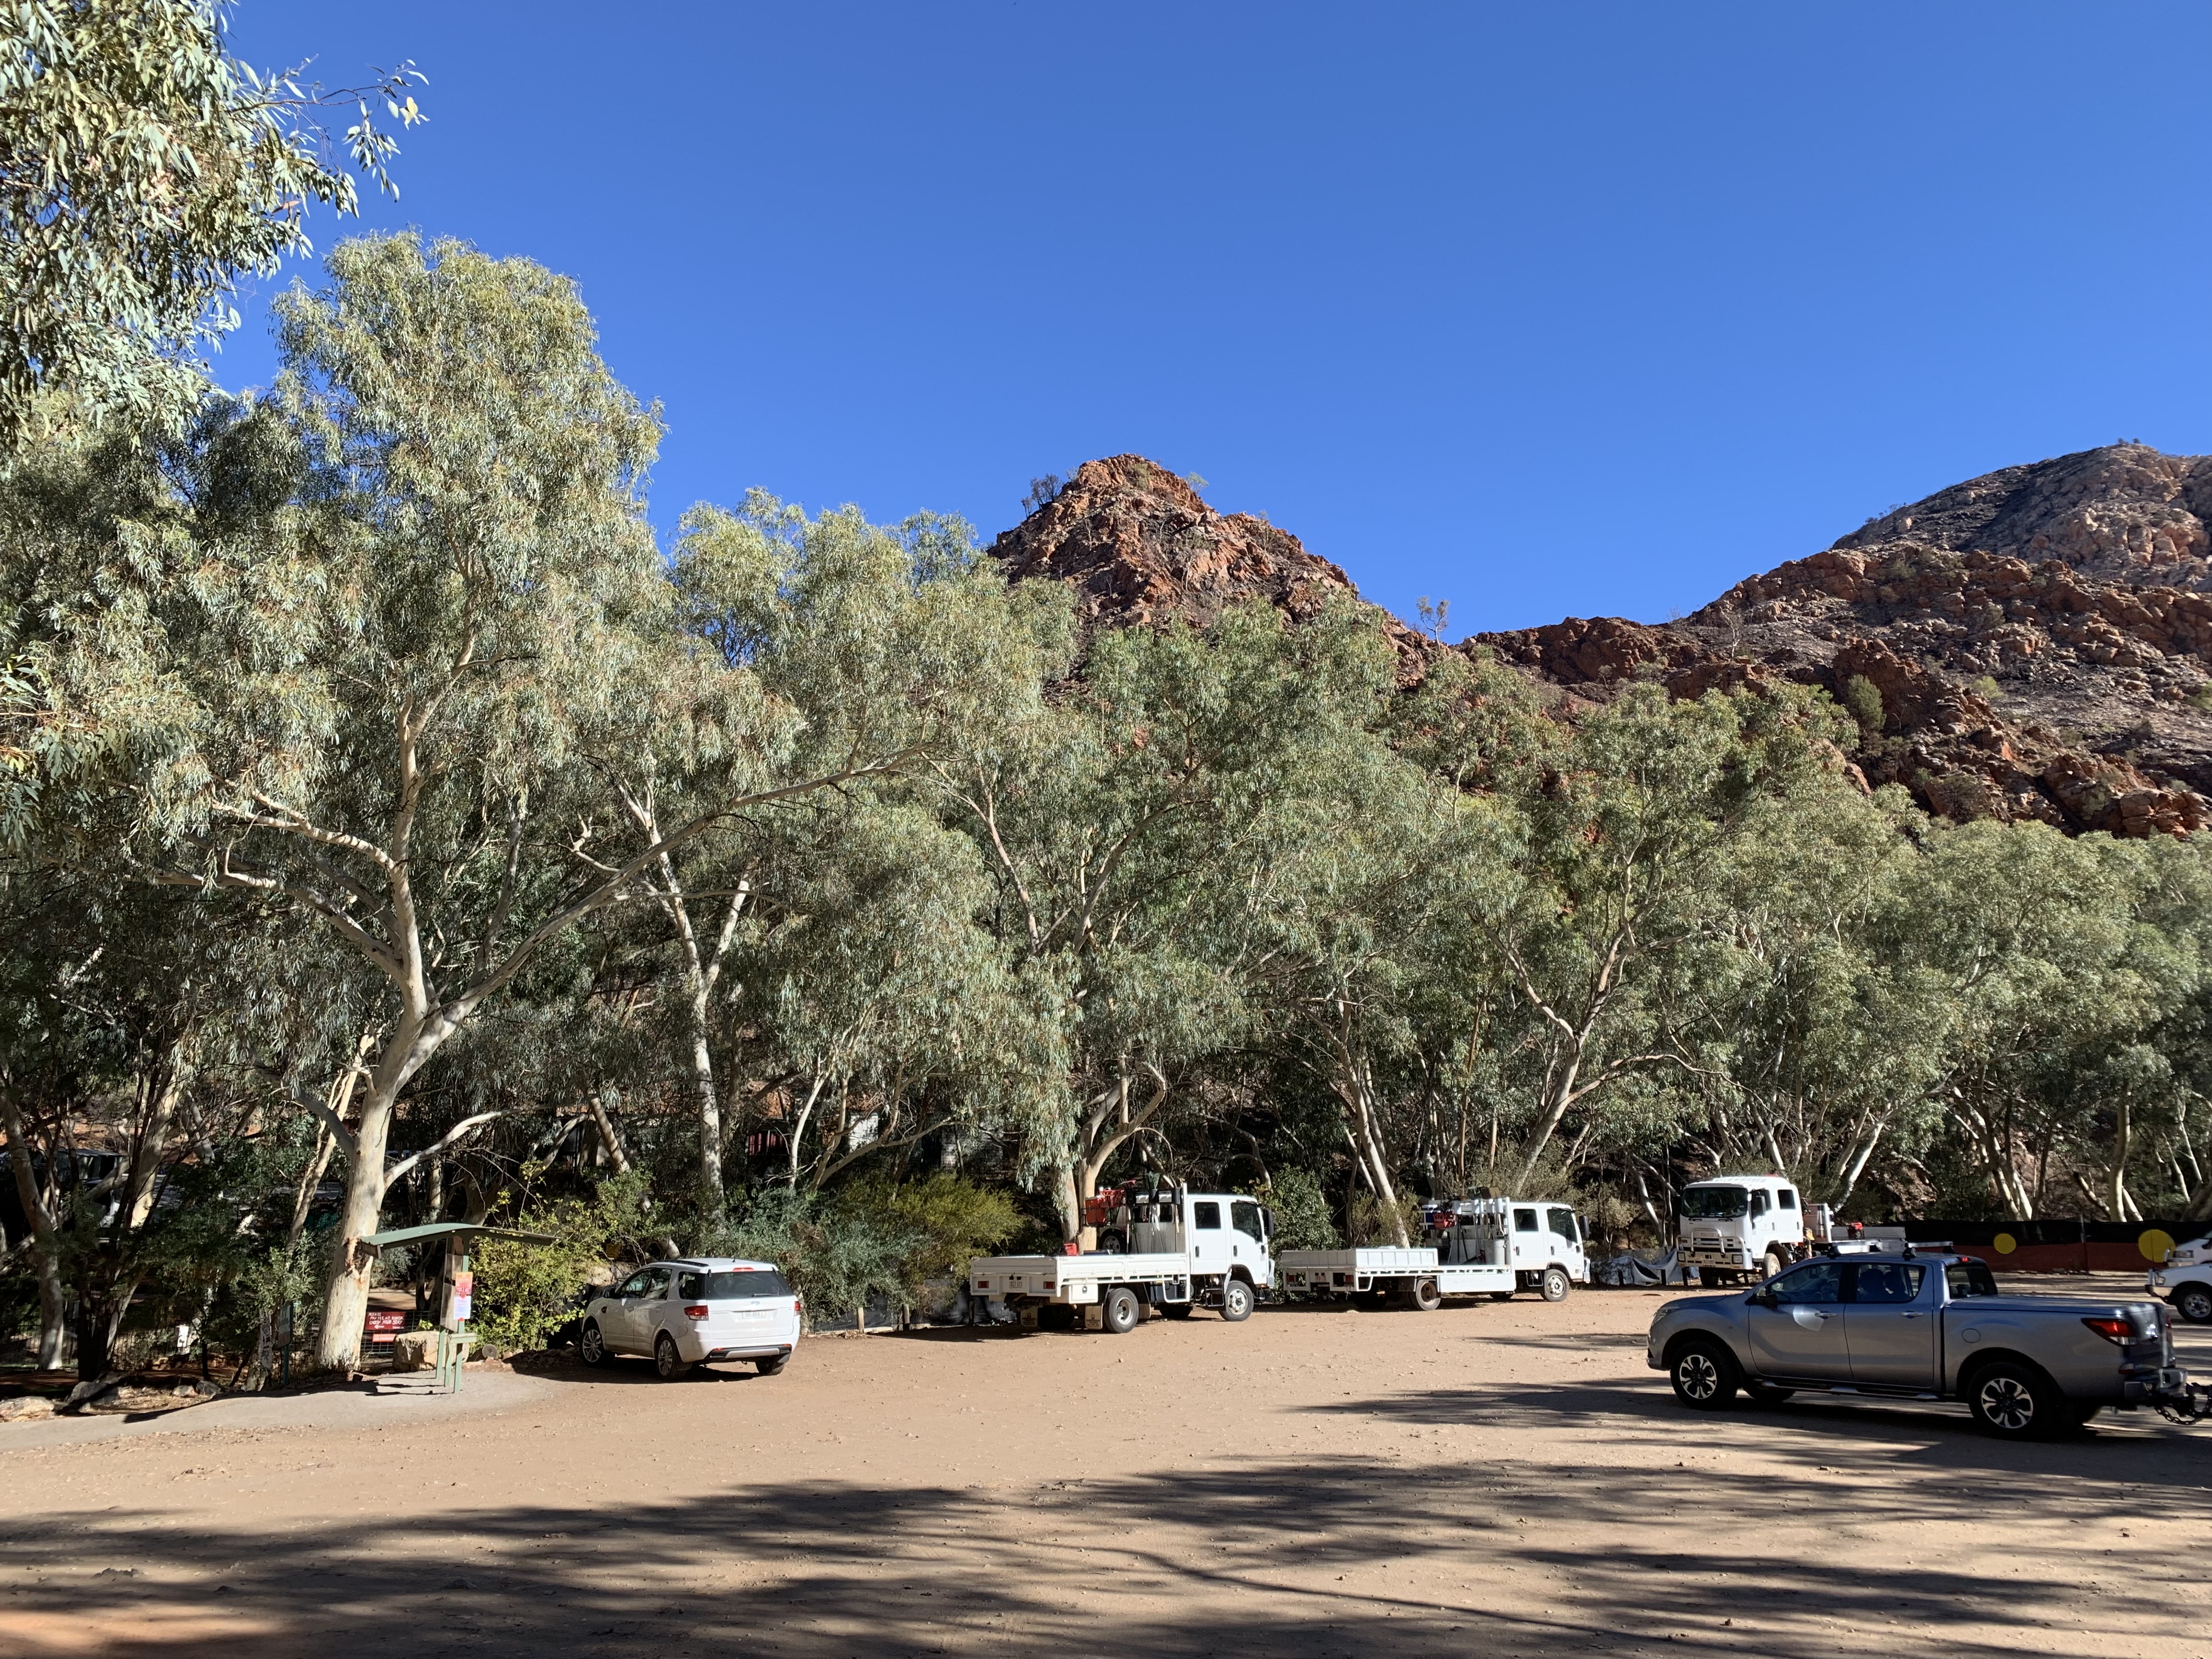 a group of cars parked in a parking lot with trees and mountains in the background